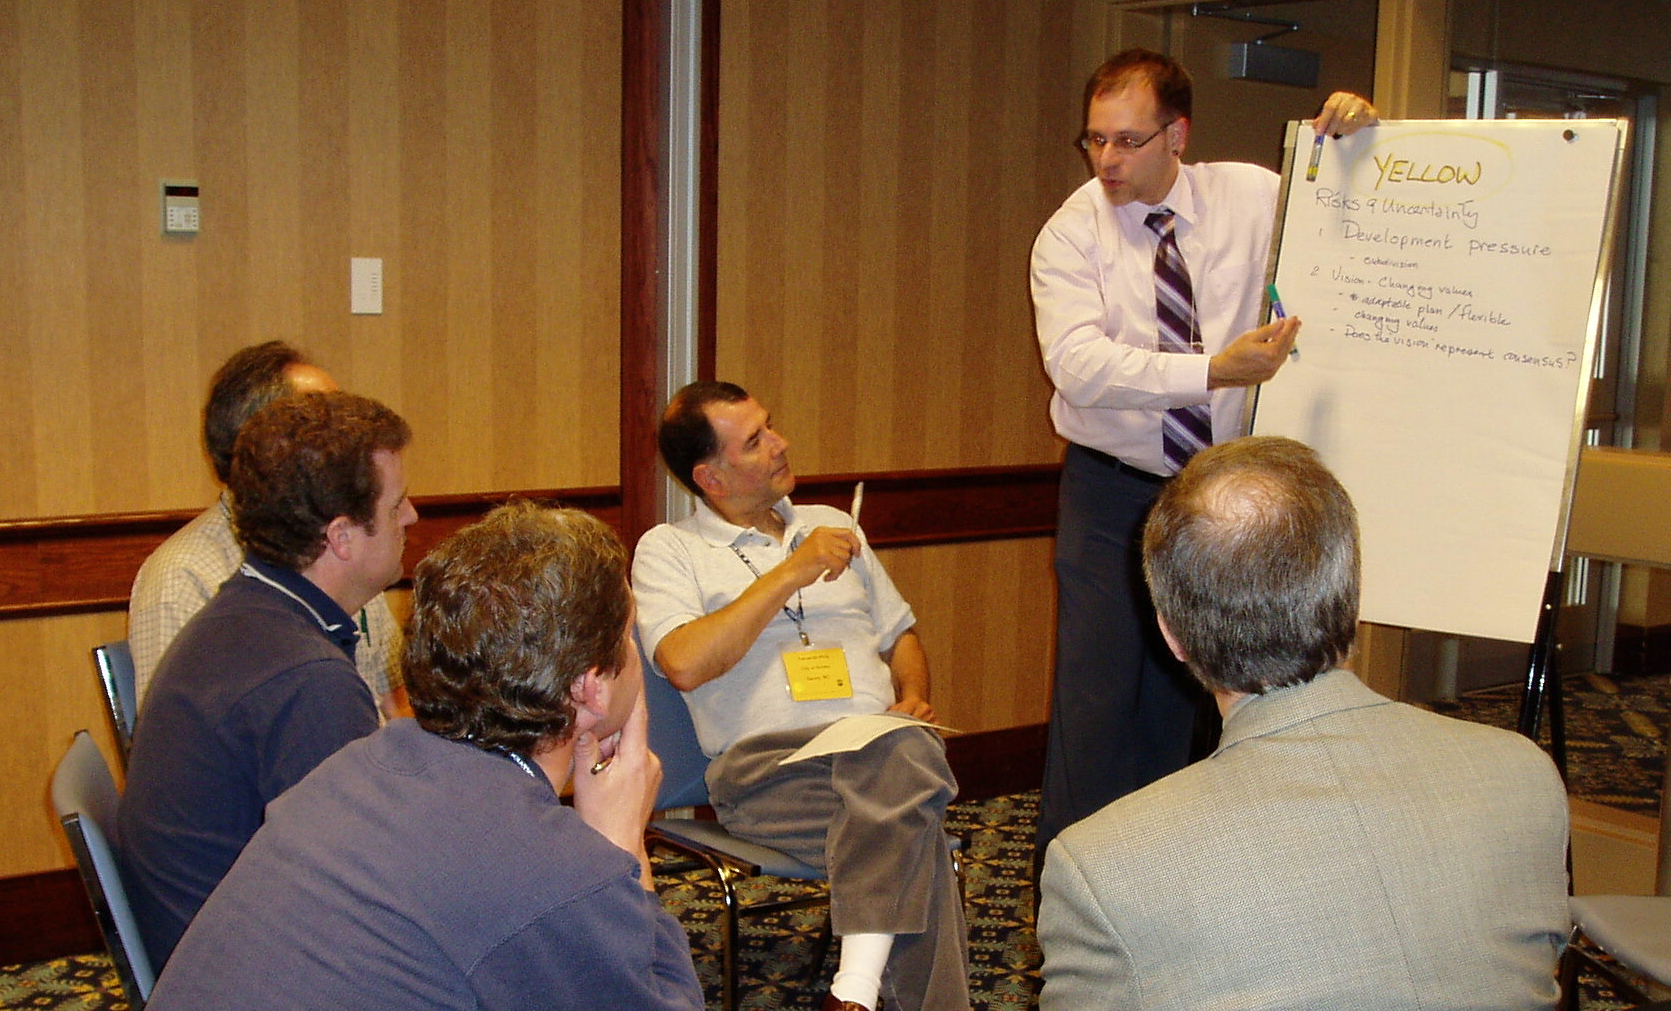 Breakout group led by Robert Hicks